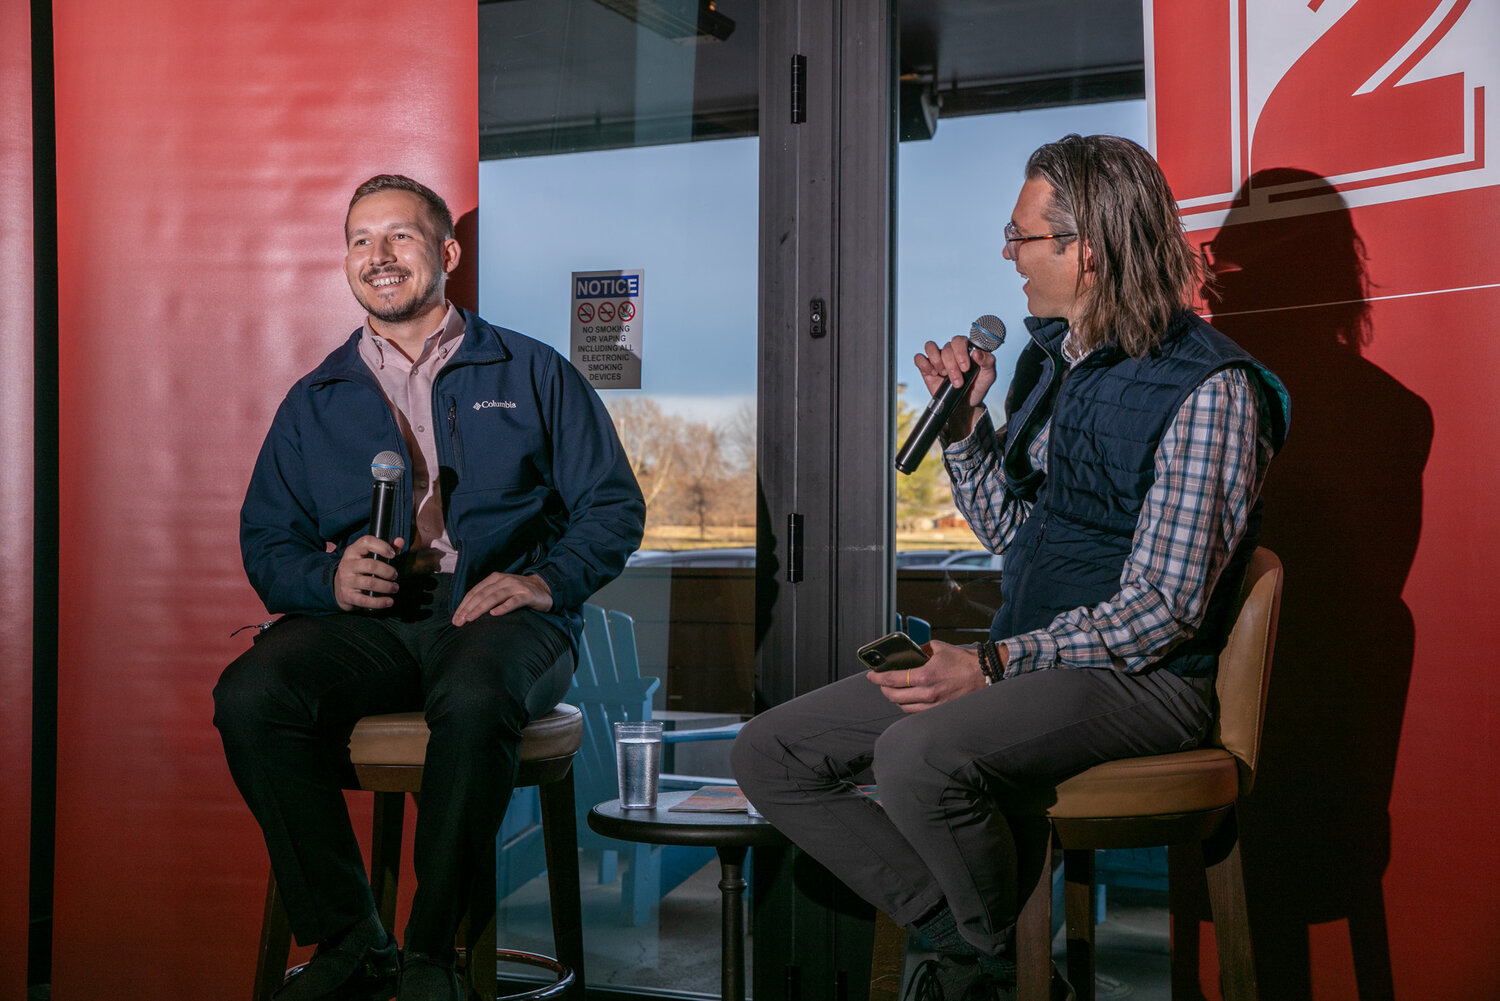 Paul Bosovik, CEO of 27North, talks about the company's growth in an interview with SBJ Editorial Vice President Eric Olson, right.